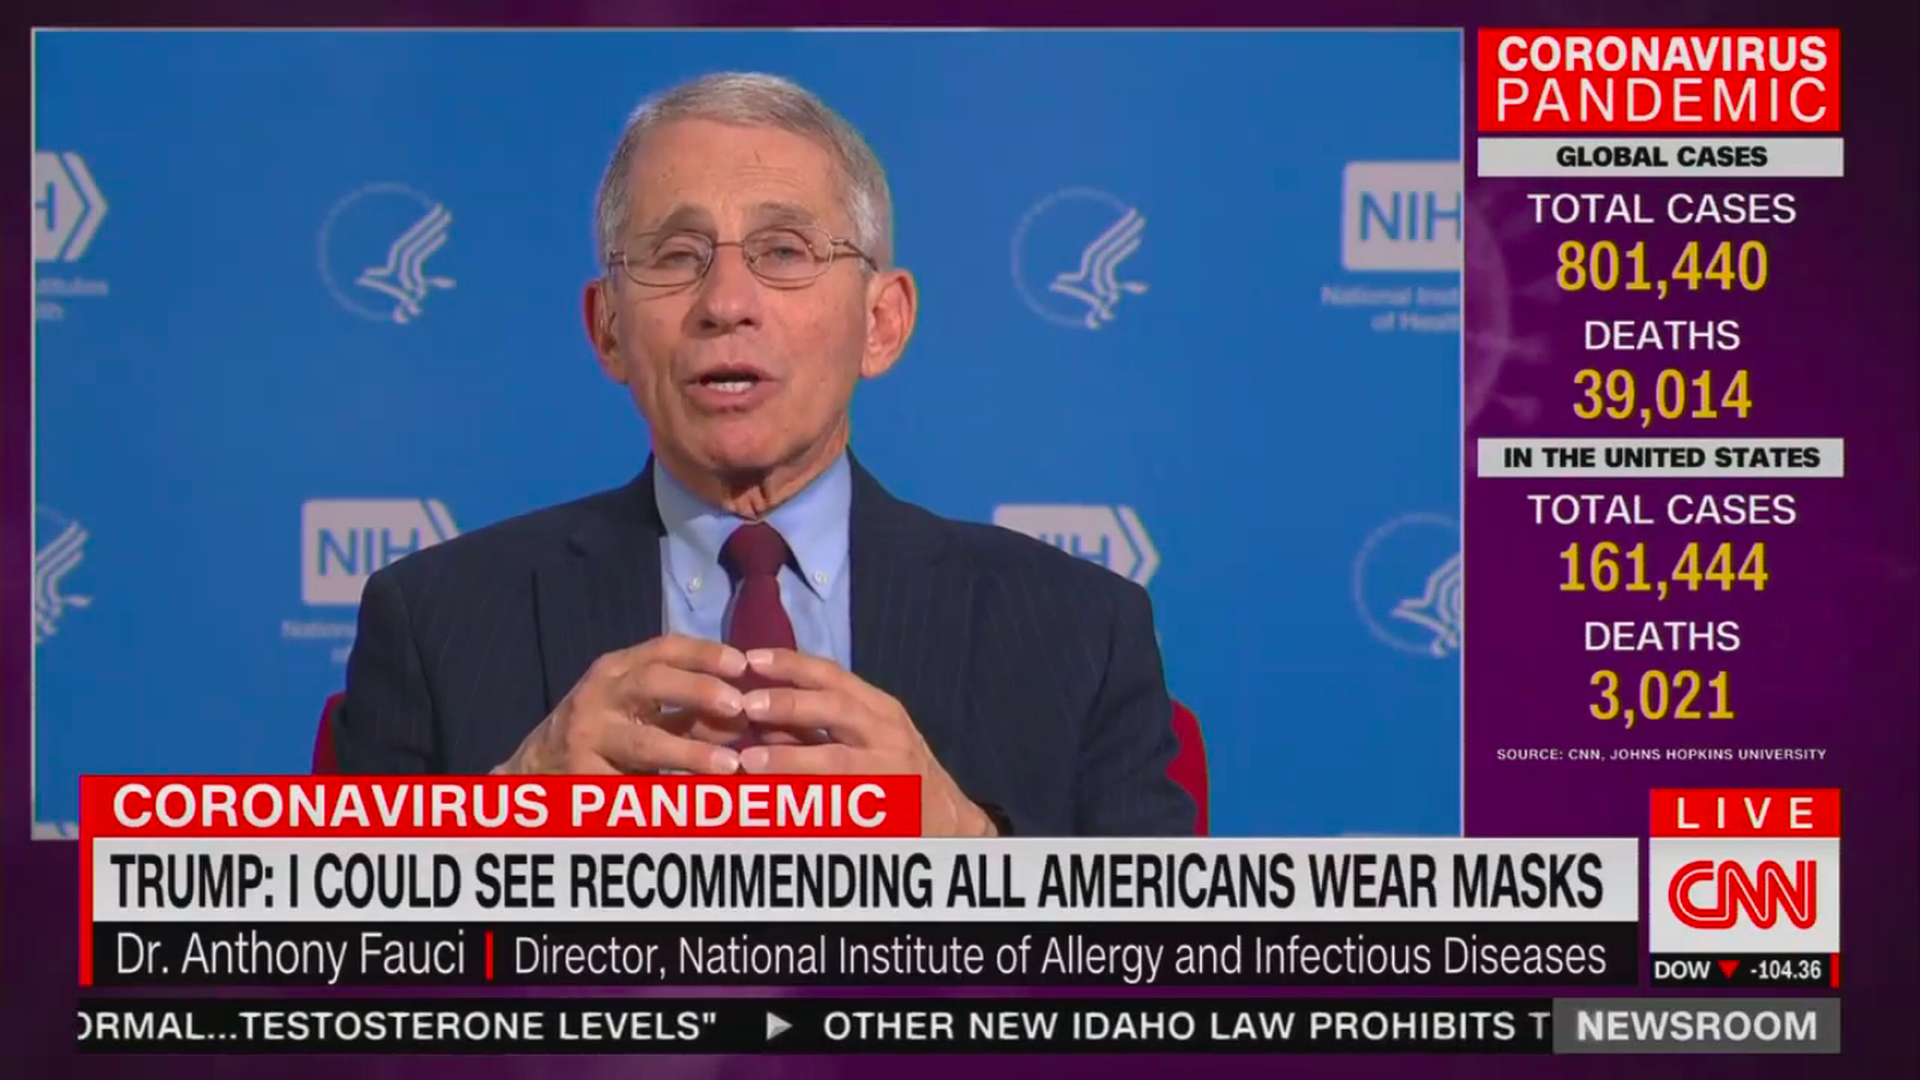 Fauci Active Discussion About Broadening Use Of Masks To Fight